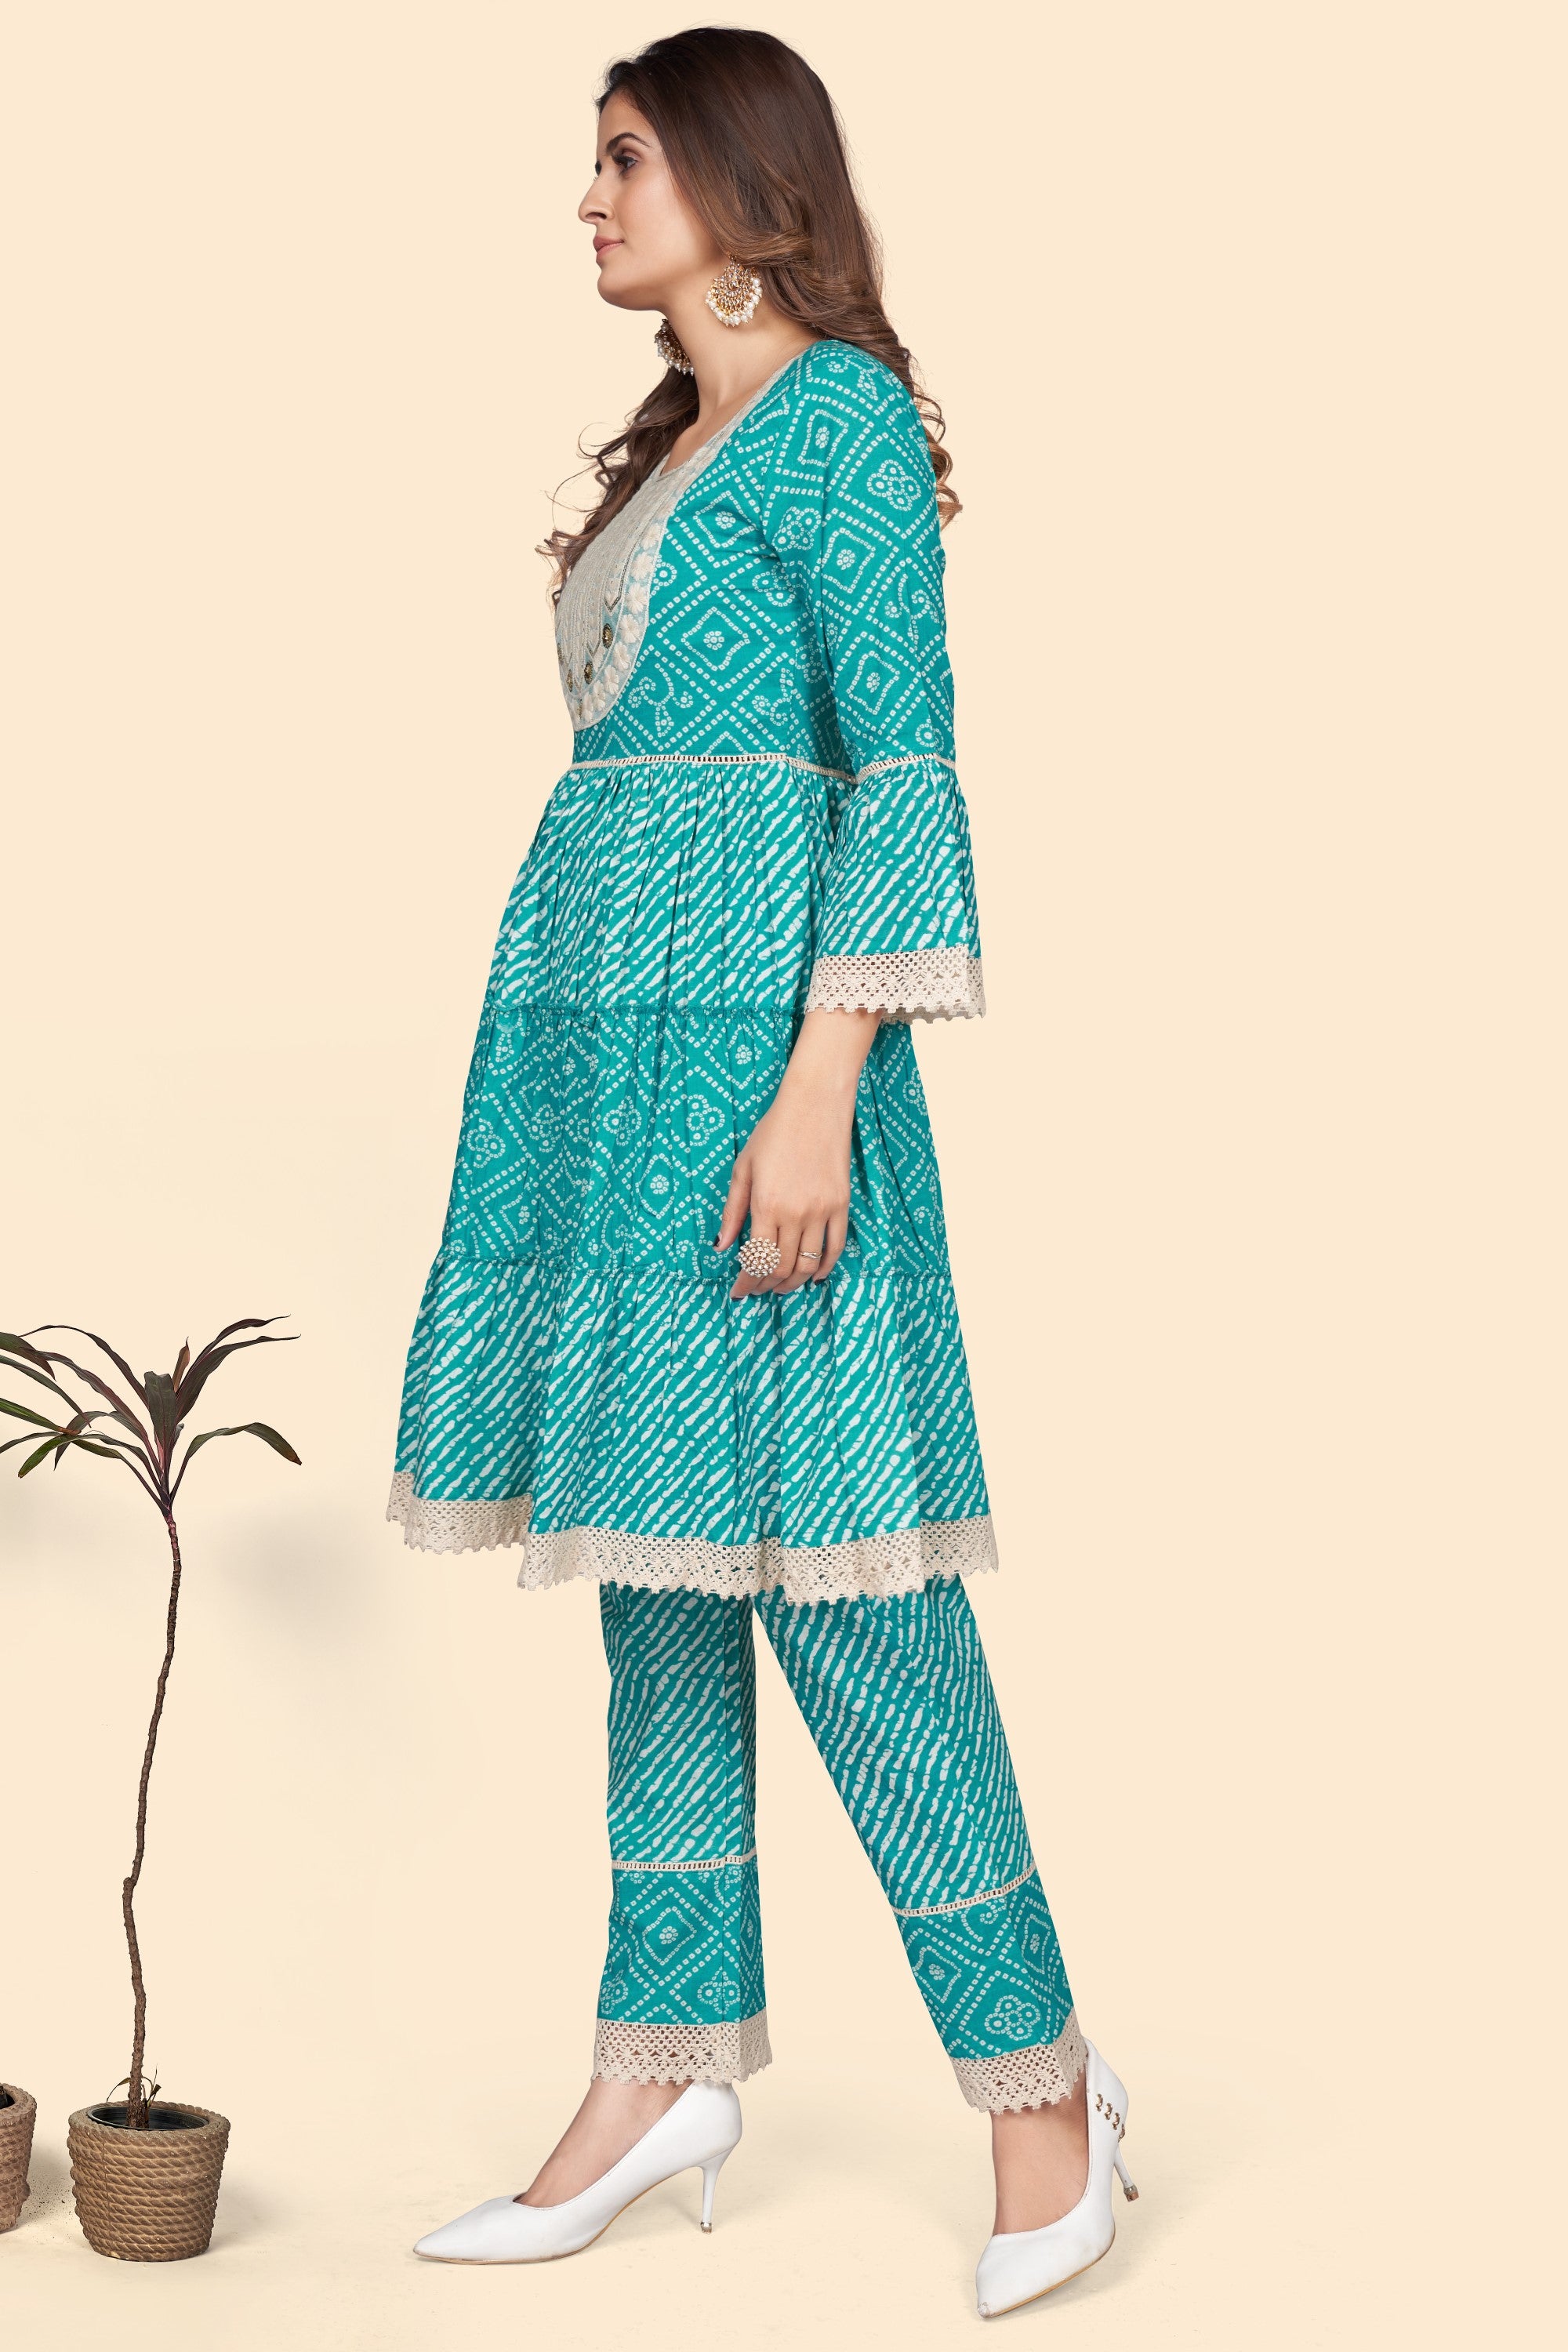 Women's Bandhani Print & Embroidered Flared Cotton Sky Blue Stitched Top With Pant - Vbuyz